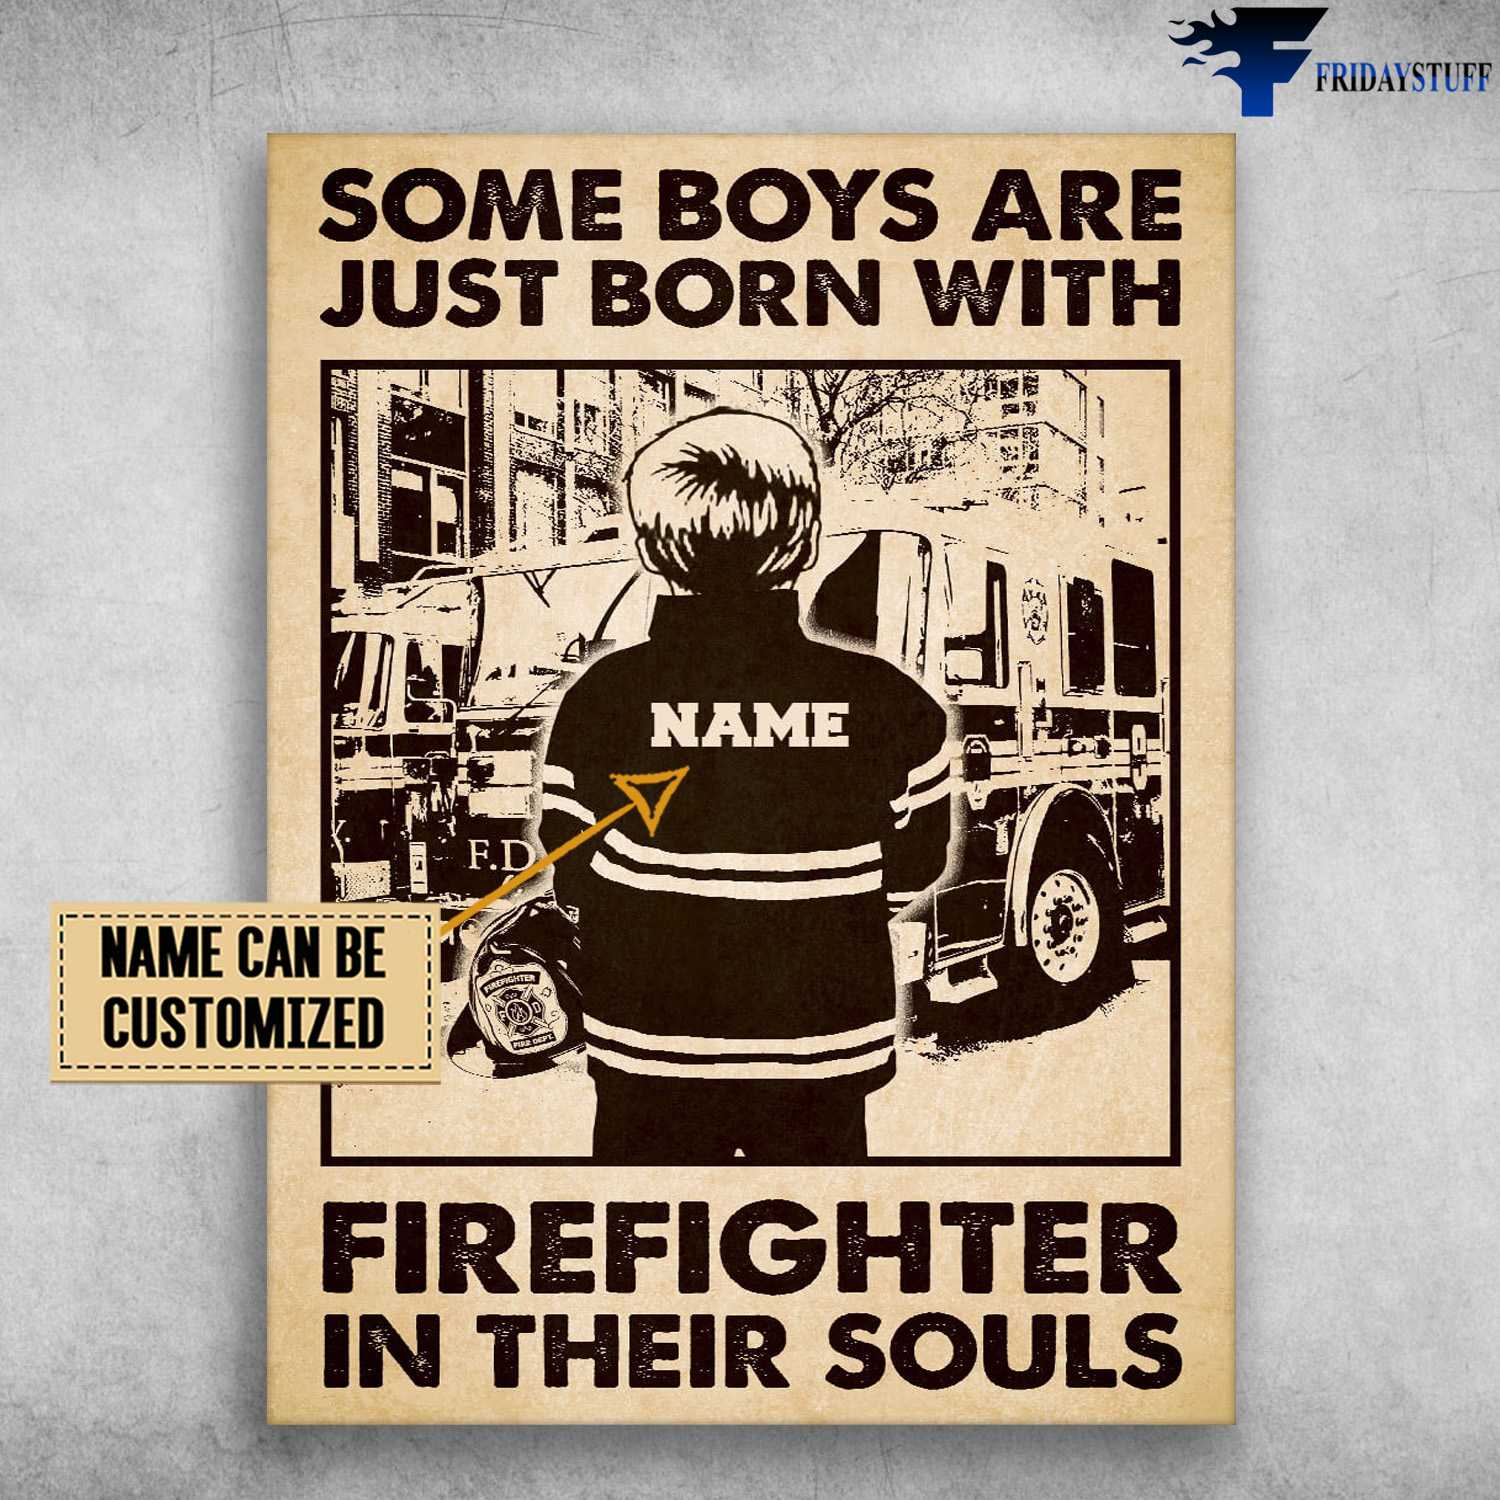 Firefighter Poster, Some Boys Are Just Born With, Firefighter In Their Soul